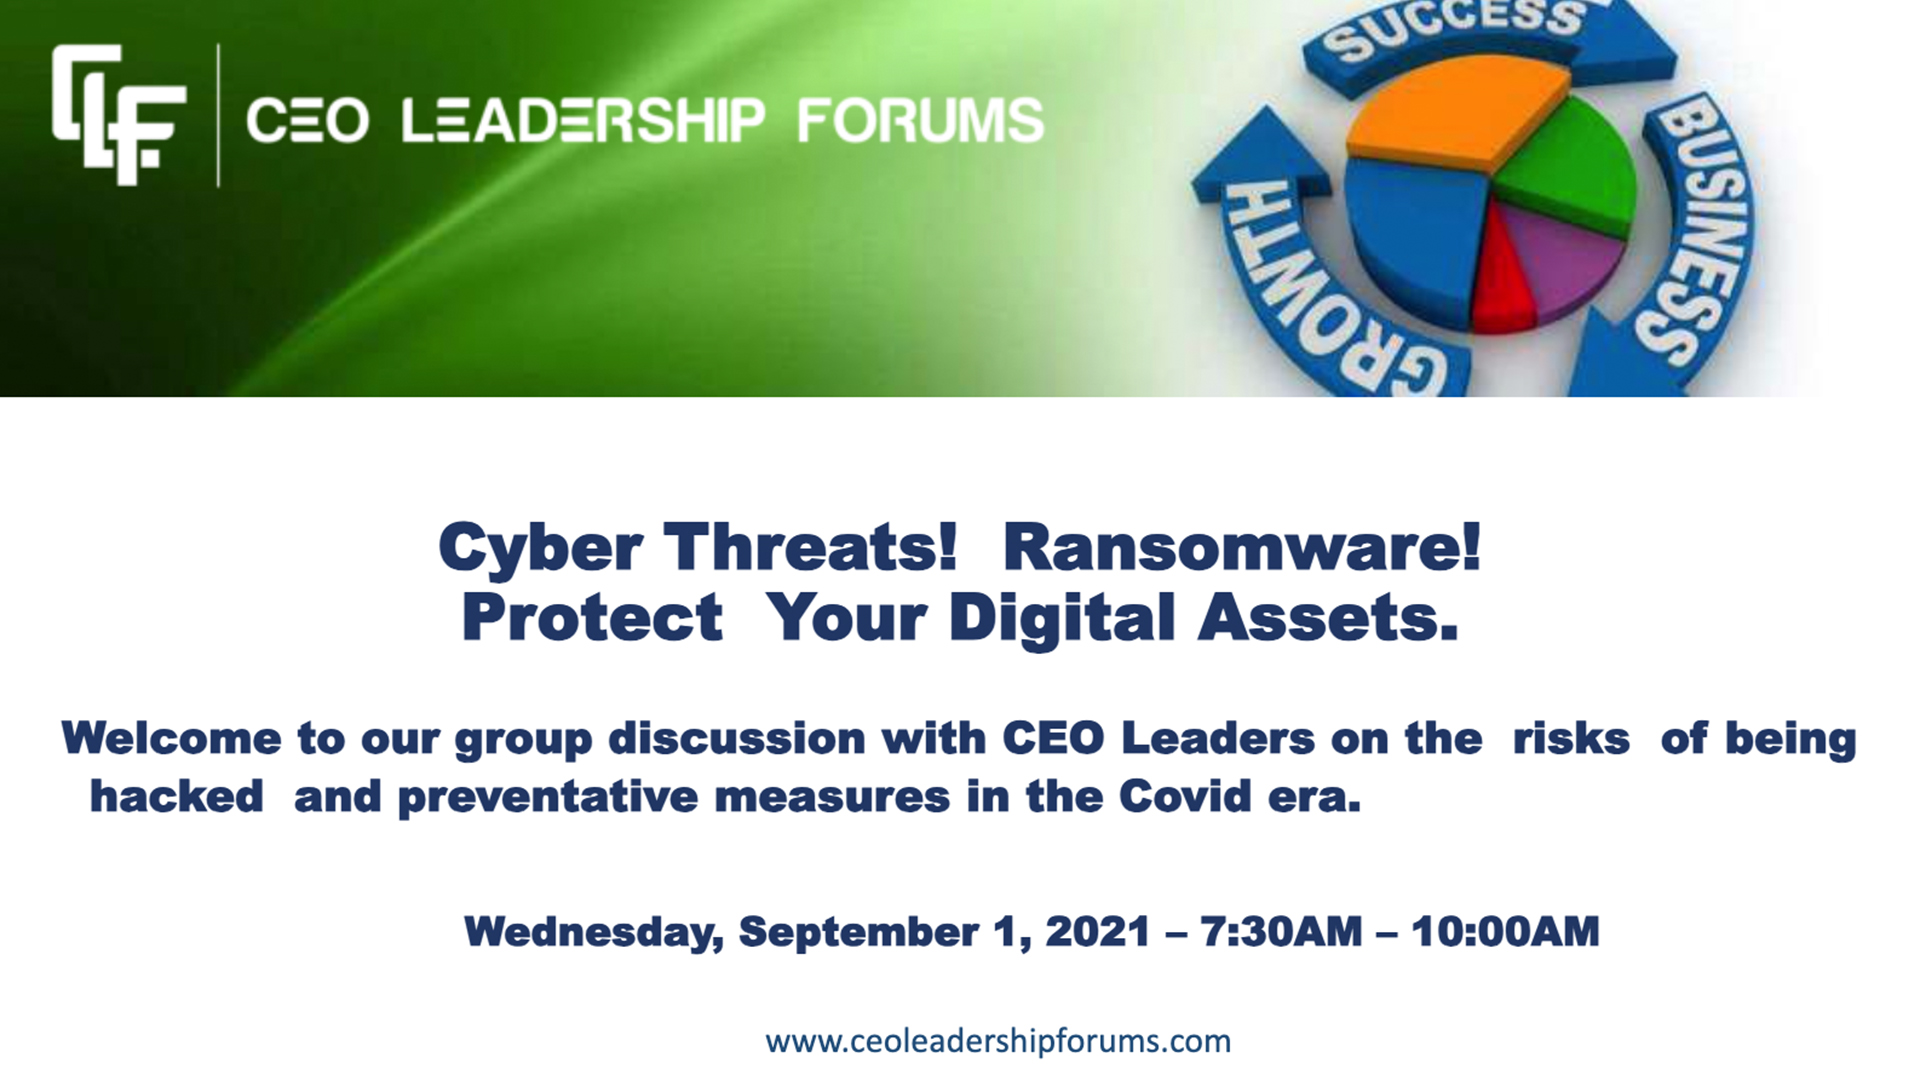 Strategies to handle cyberthreat issues webinar poster image